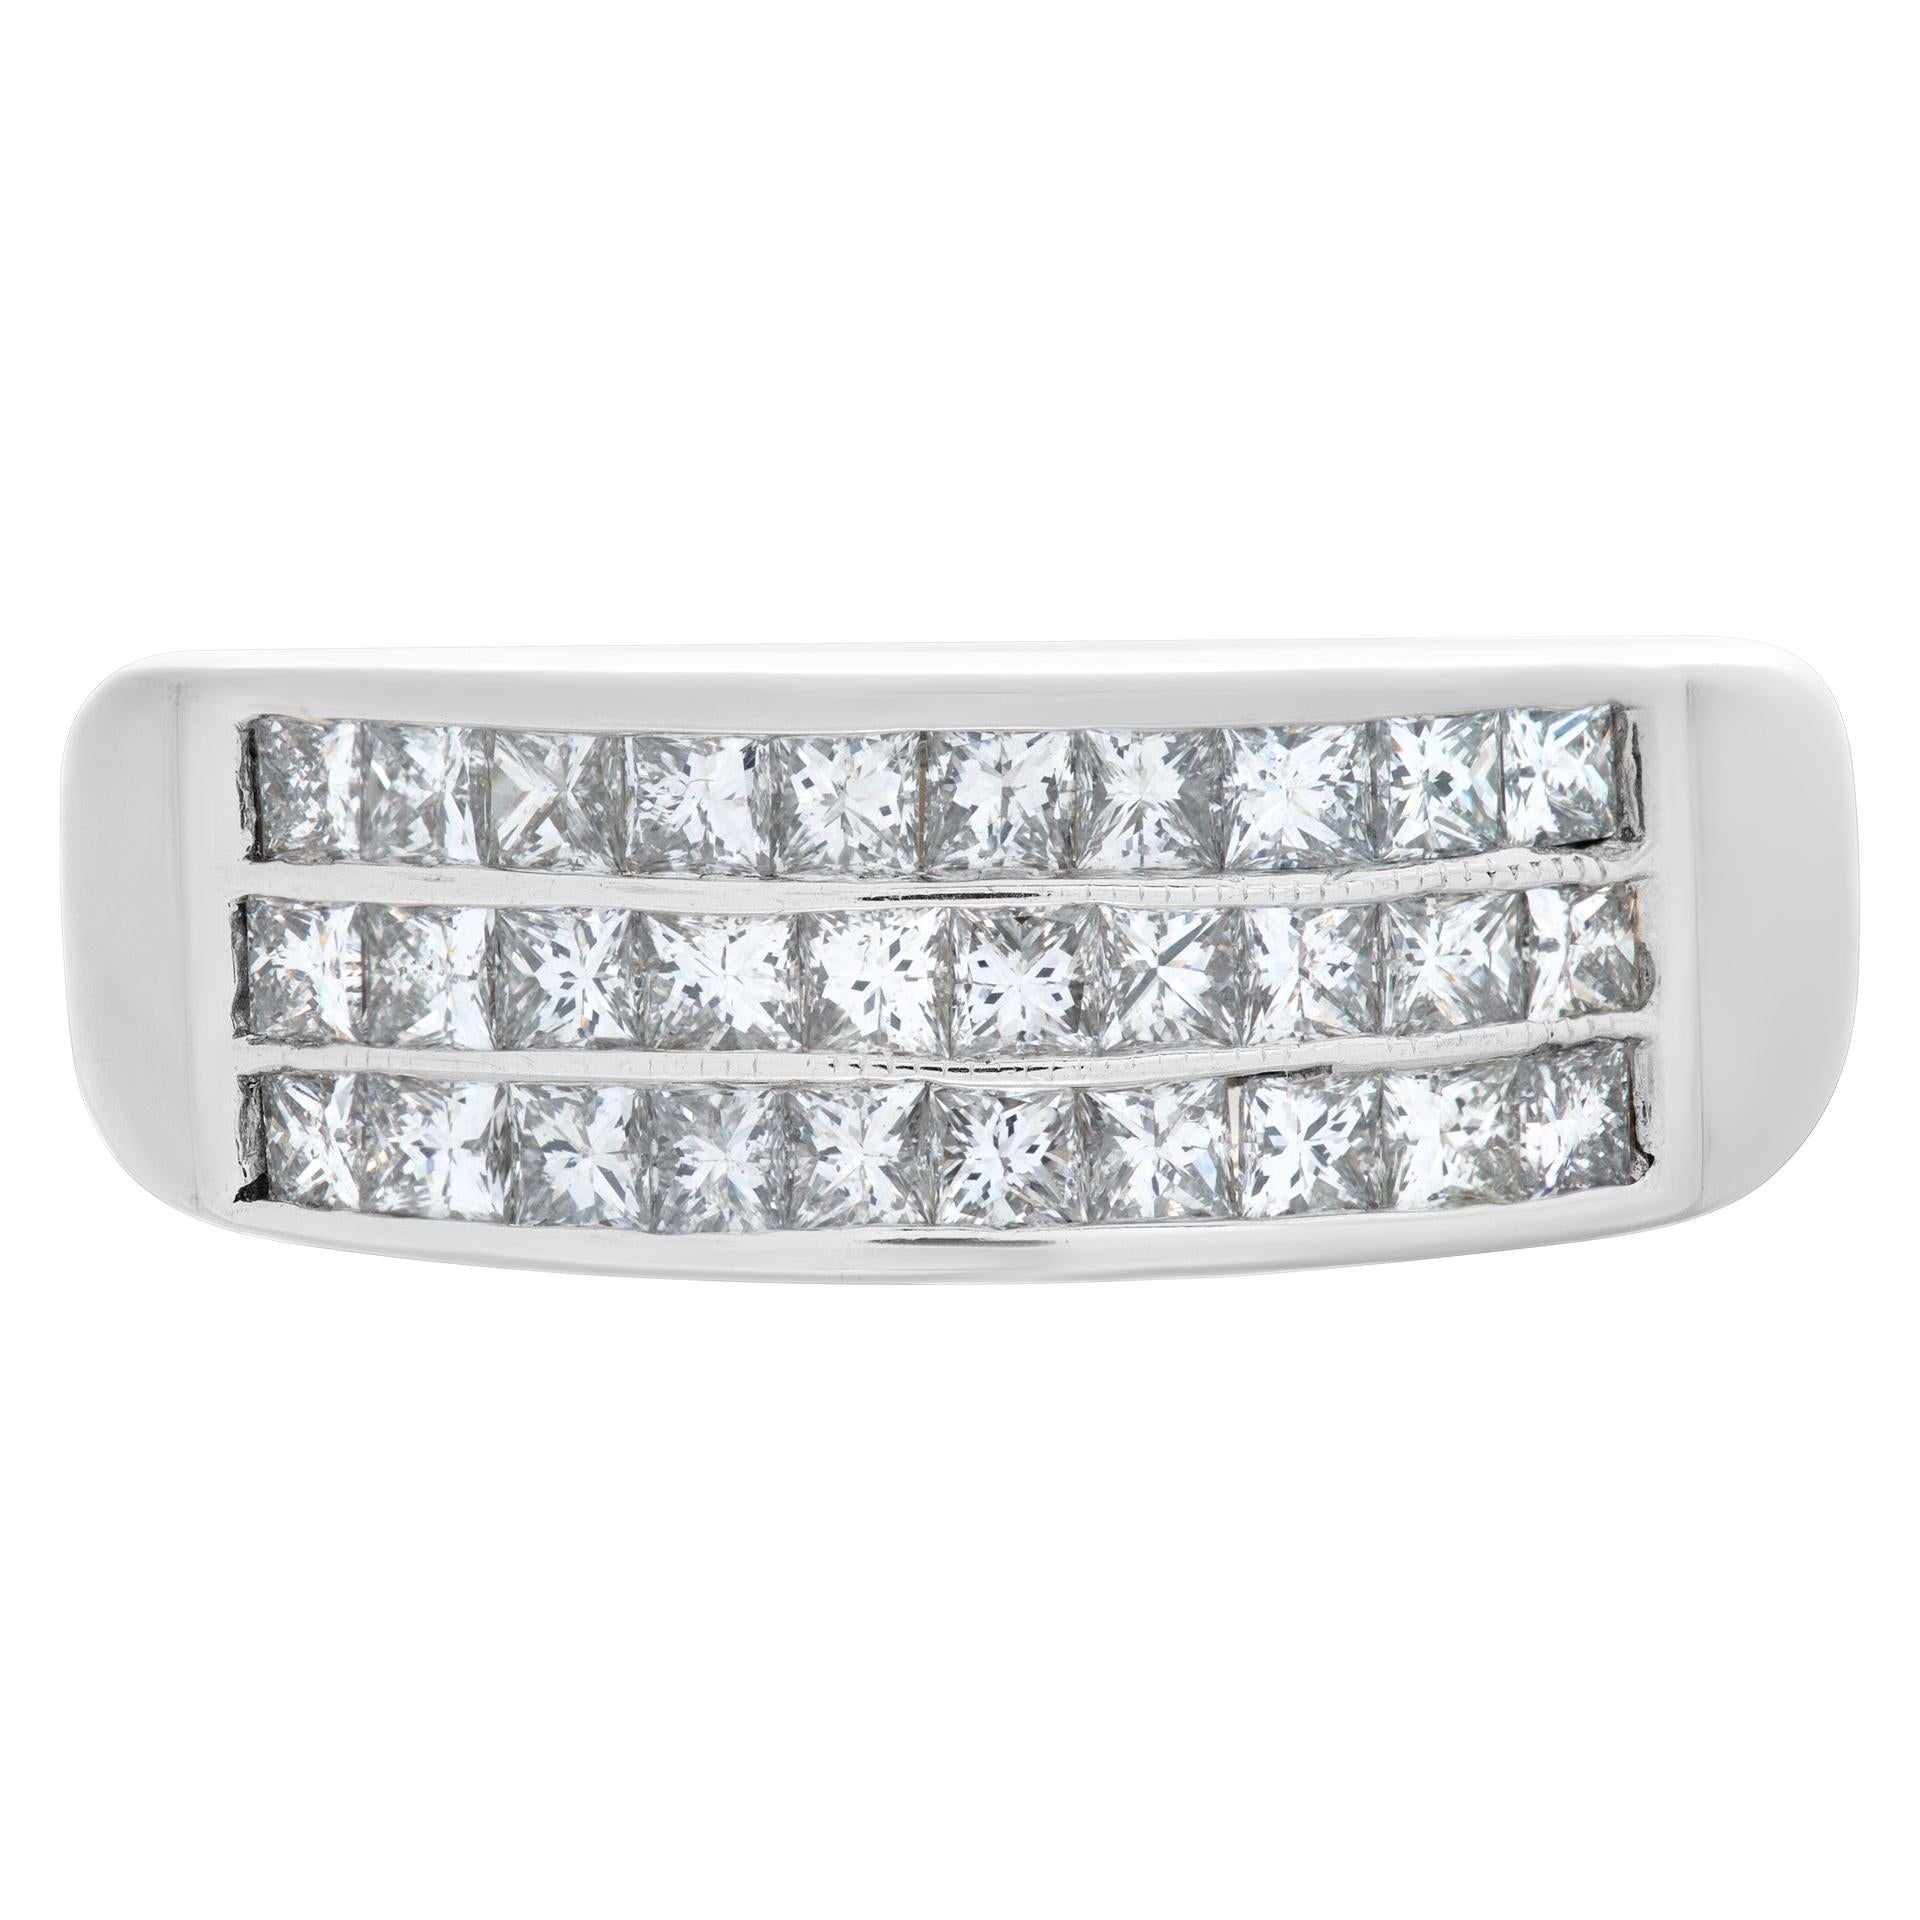 Invisible set princess cut diamond ring in 14k white gold. Approximately 0.90 carats in G-H color, VS -SI clarity diamonds. Ring size 6.5

This Diamond ring is currently size 6.5 and some items can be sized up or down, please ask! It weighs 3.7